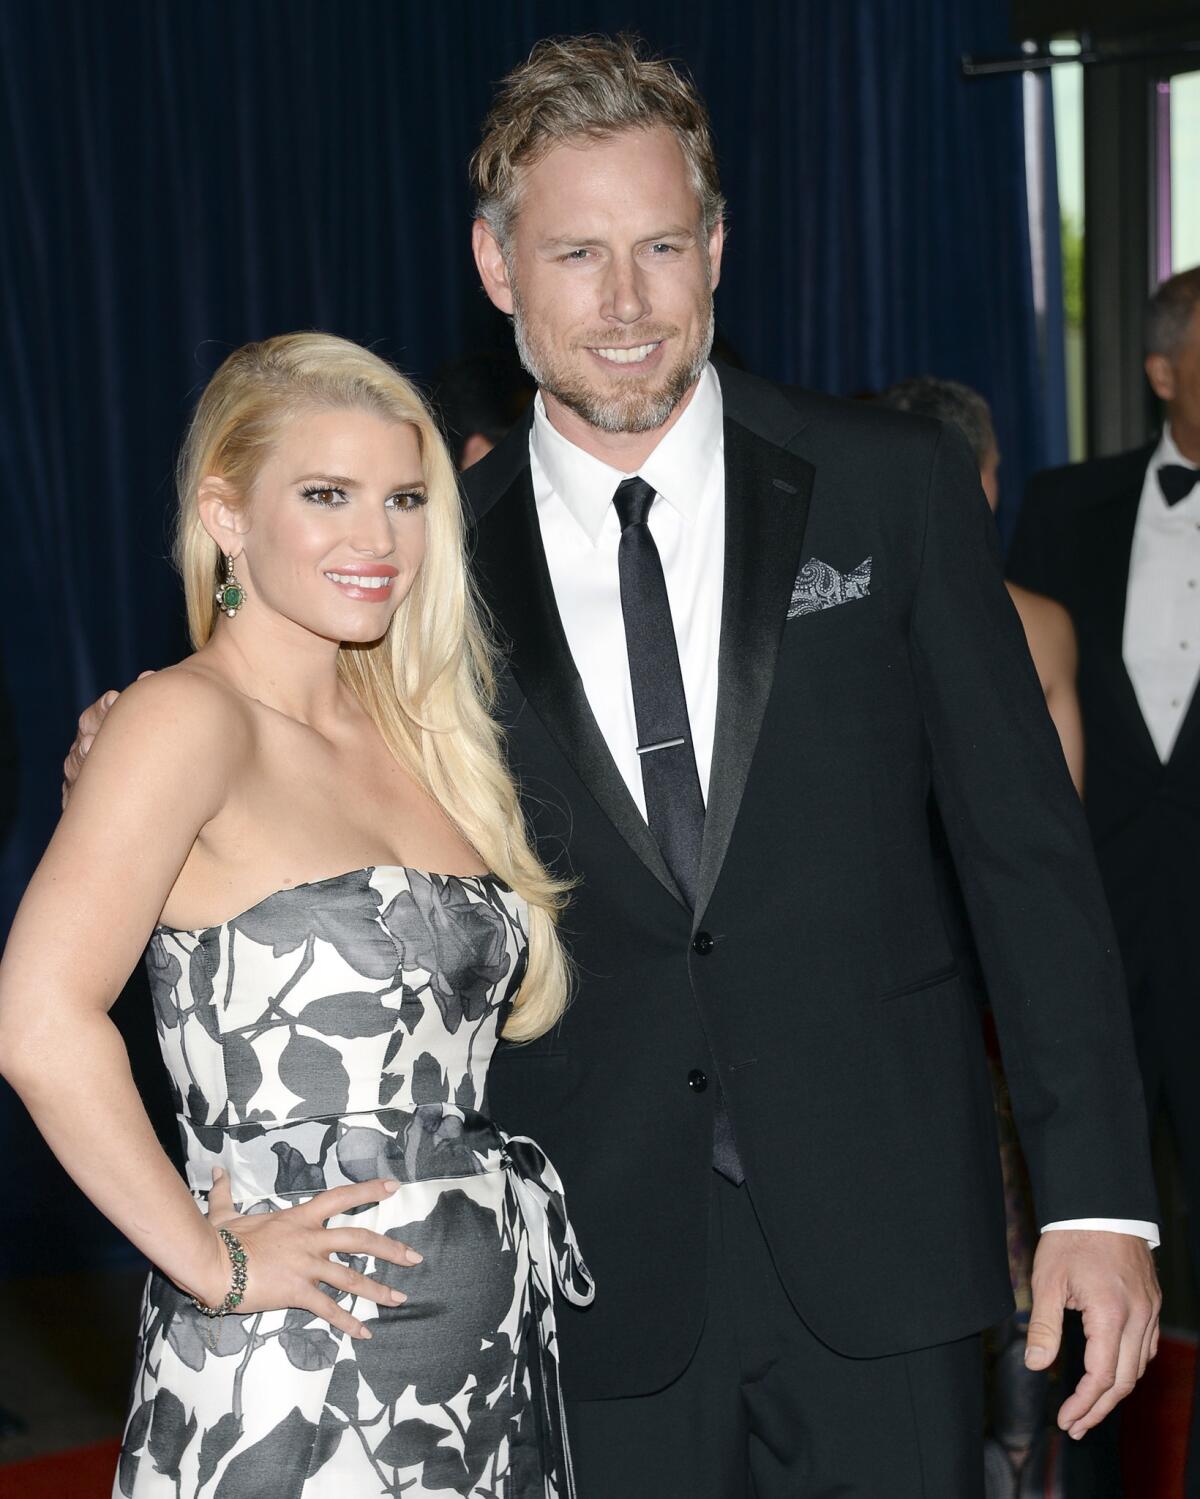 Pregnant Jessica Simpson to marry Eric Johnson after birth of